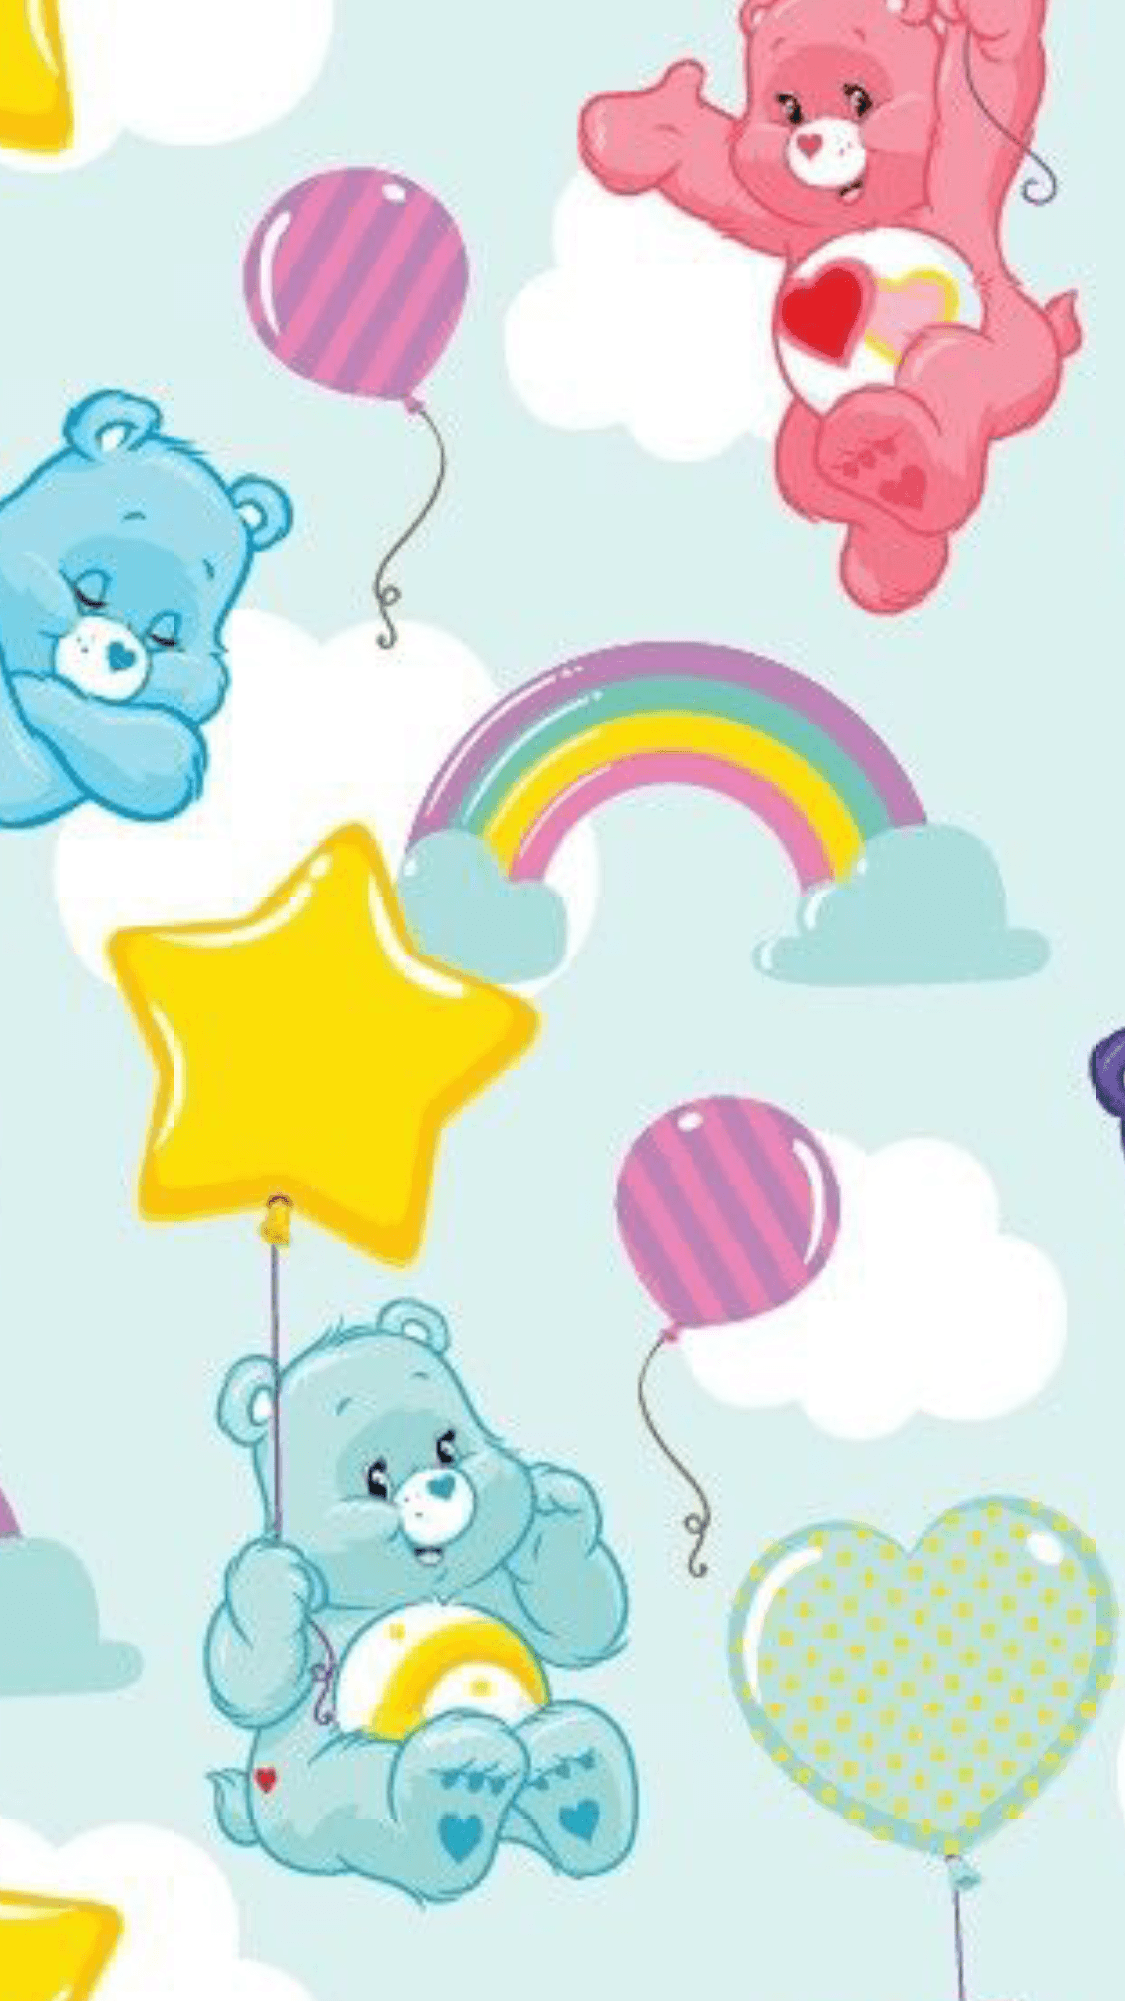 Care Bears iPhone Wallpaper tjn. background. Care